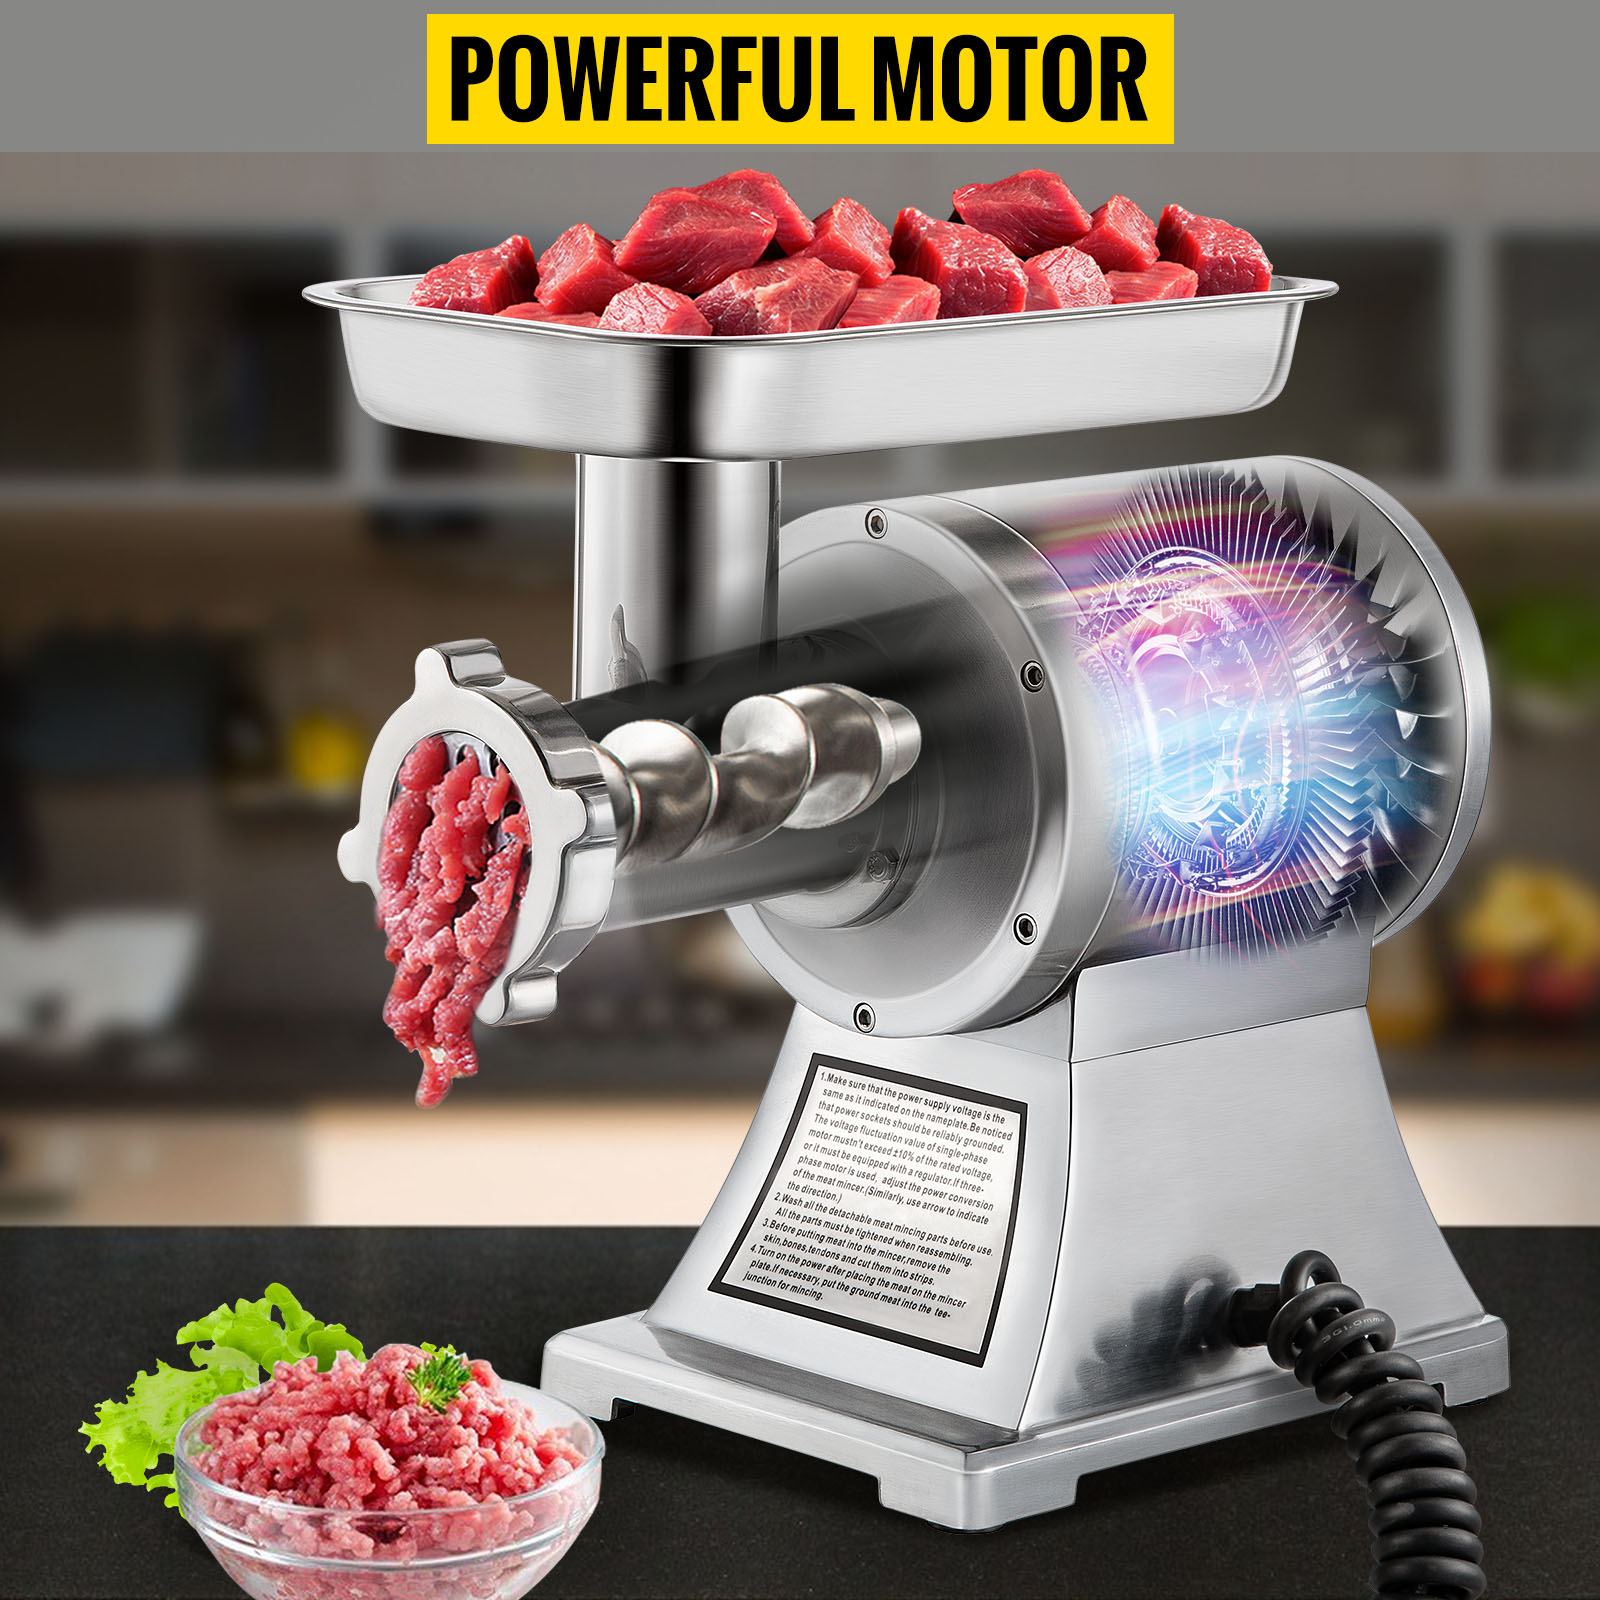  Tangkula Commercial Meat Grinder, 1.5 HP, 1100W, 551LB/h  Stainless Steel Electric Sausage Stuffer, 225RPM Heavy Duty Industrial Meat  Mincer w/2 Blades, Grinding Plates & Stuffing Tubes: Home & Kitchen